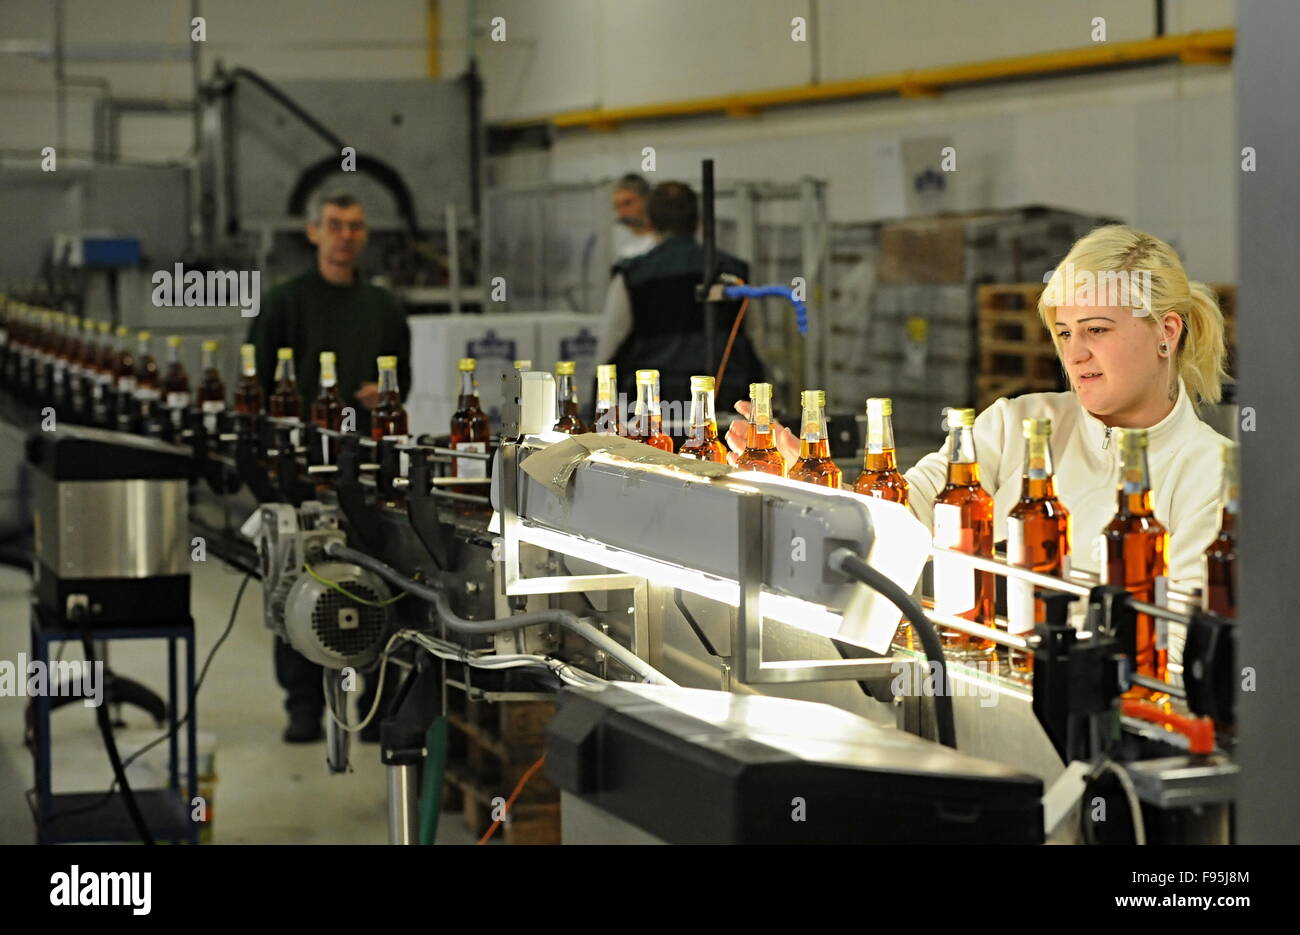 Jindrichuv Hradec, Czech Republic. 14th Dec, 2015. The production line in the Fruko Schulz company in Jindrichuv Hradec, Czech Republic, December 14, 2015. Fruko Schulz is one of the largest Czech manufacturers of spirits and liqueurs. © Vaclav Pancer/CTK Photo/Alamy Live News Stock Photo